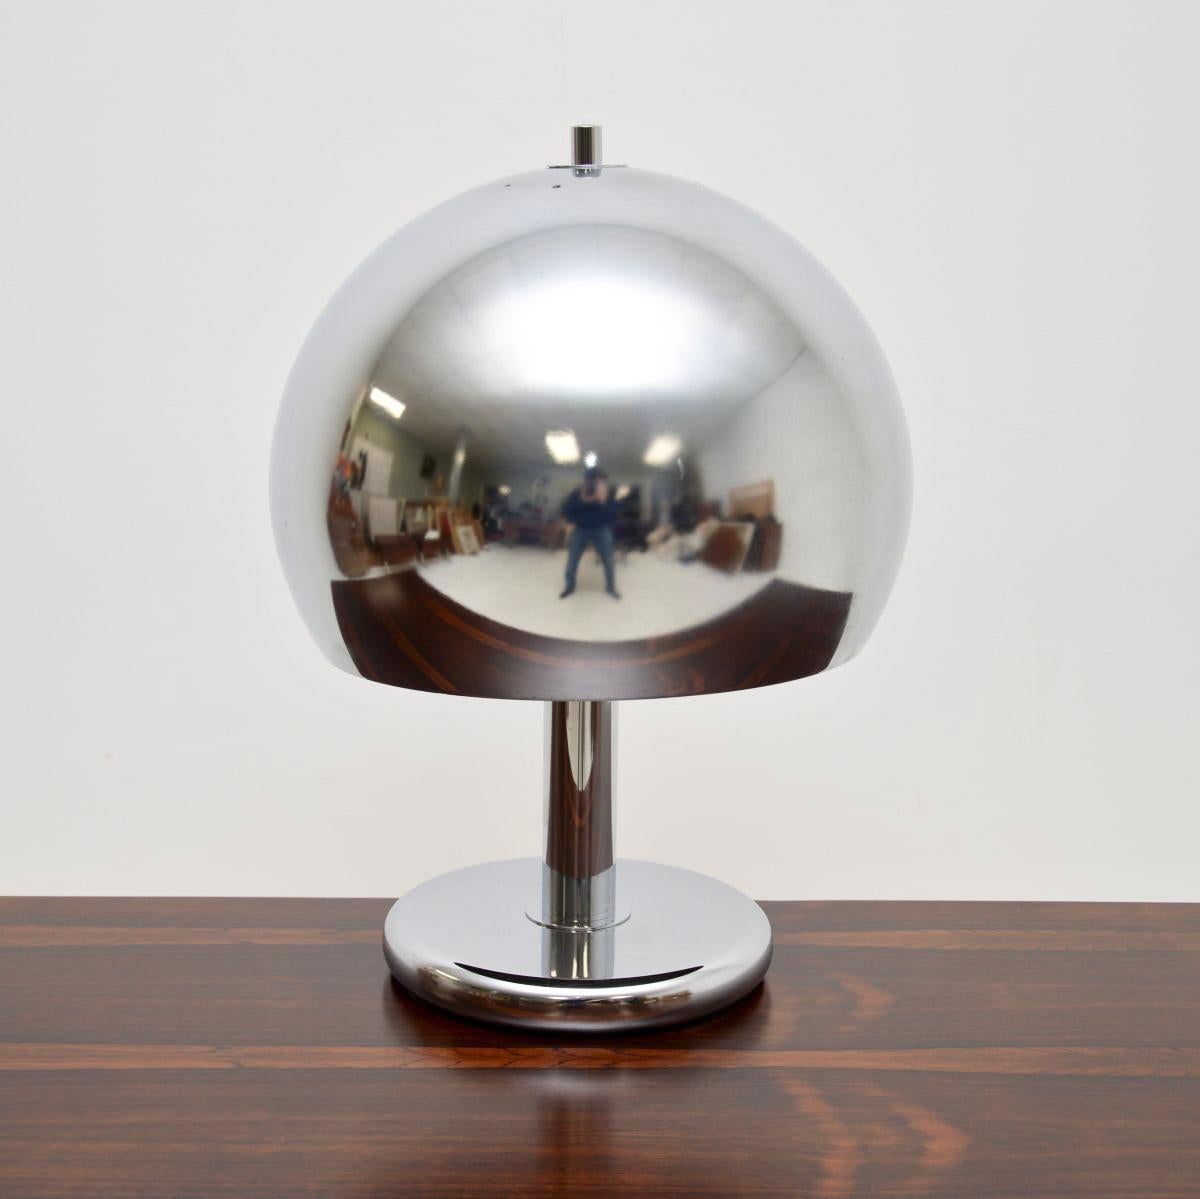 A stunning vintage chrome mushroom lamp, made in France and dating from the 1970’s.

It is of outstanding quality, with a very thick and sturdy chromed steel frame. This is a great size to be used as a desk lamp or table lamp around the home. It is